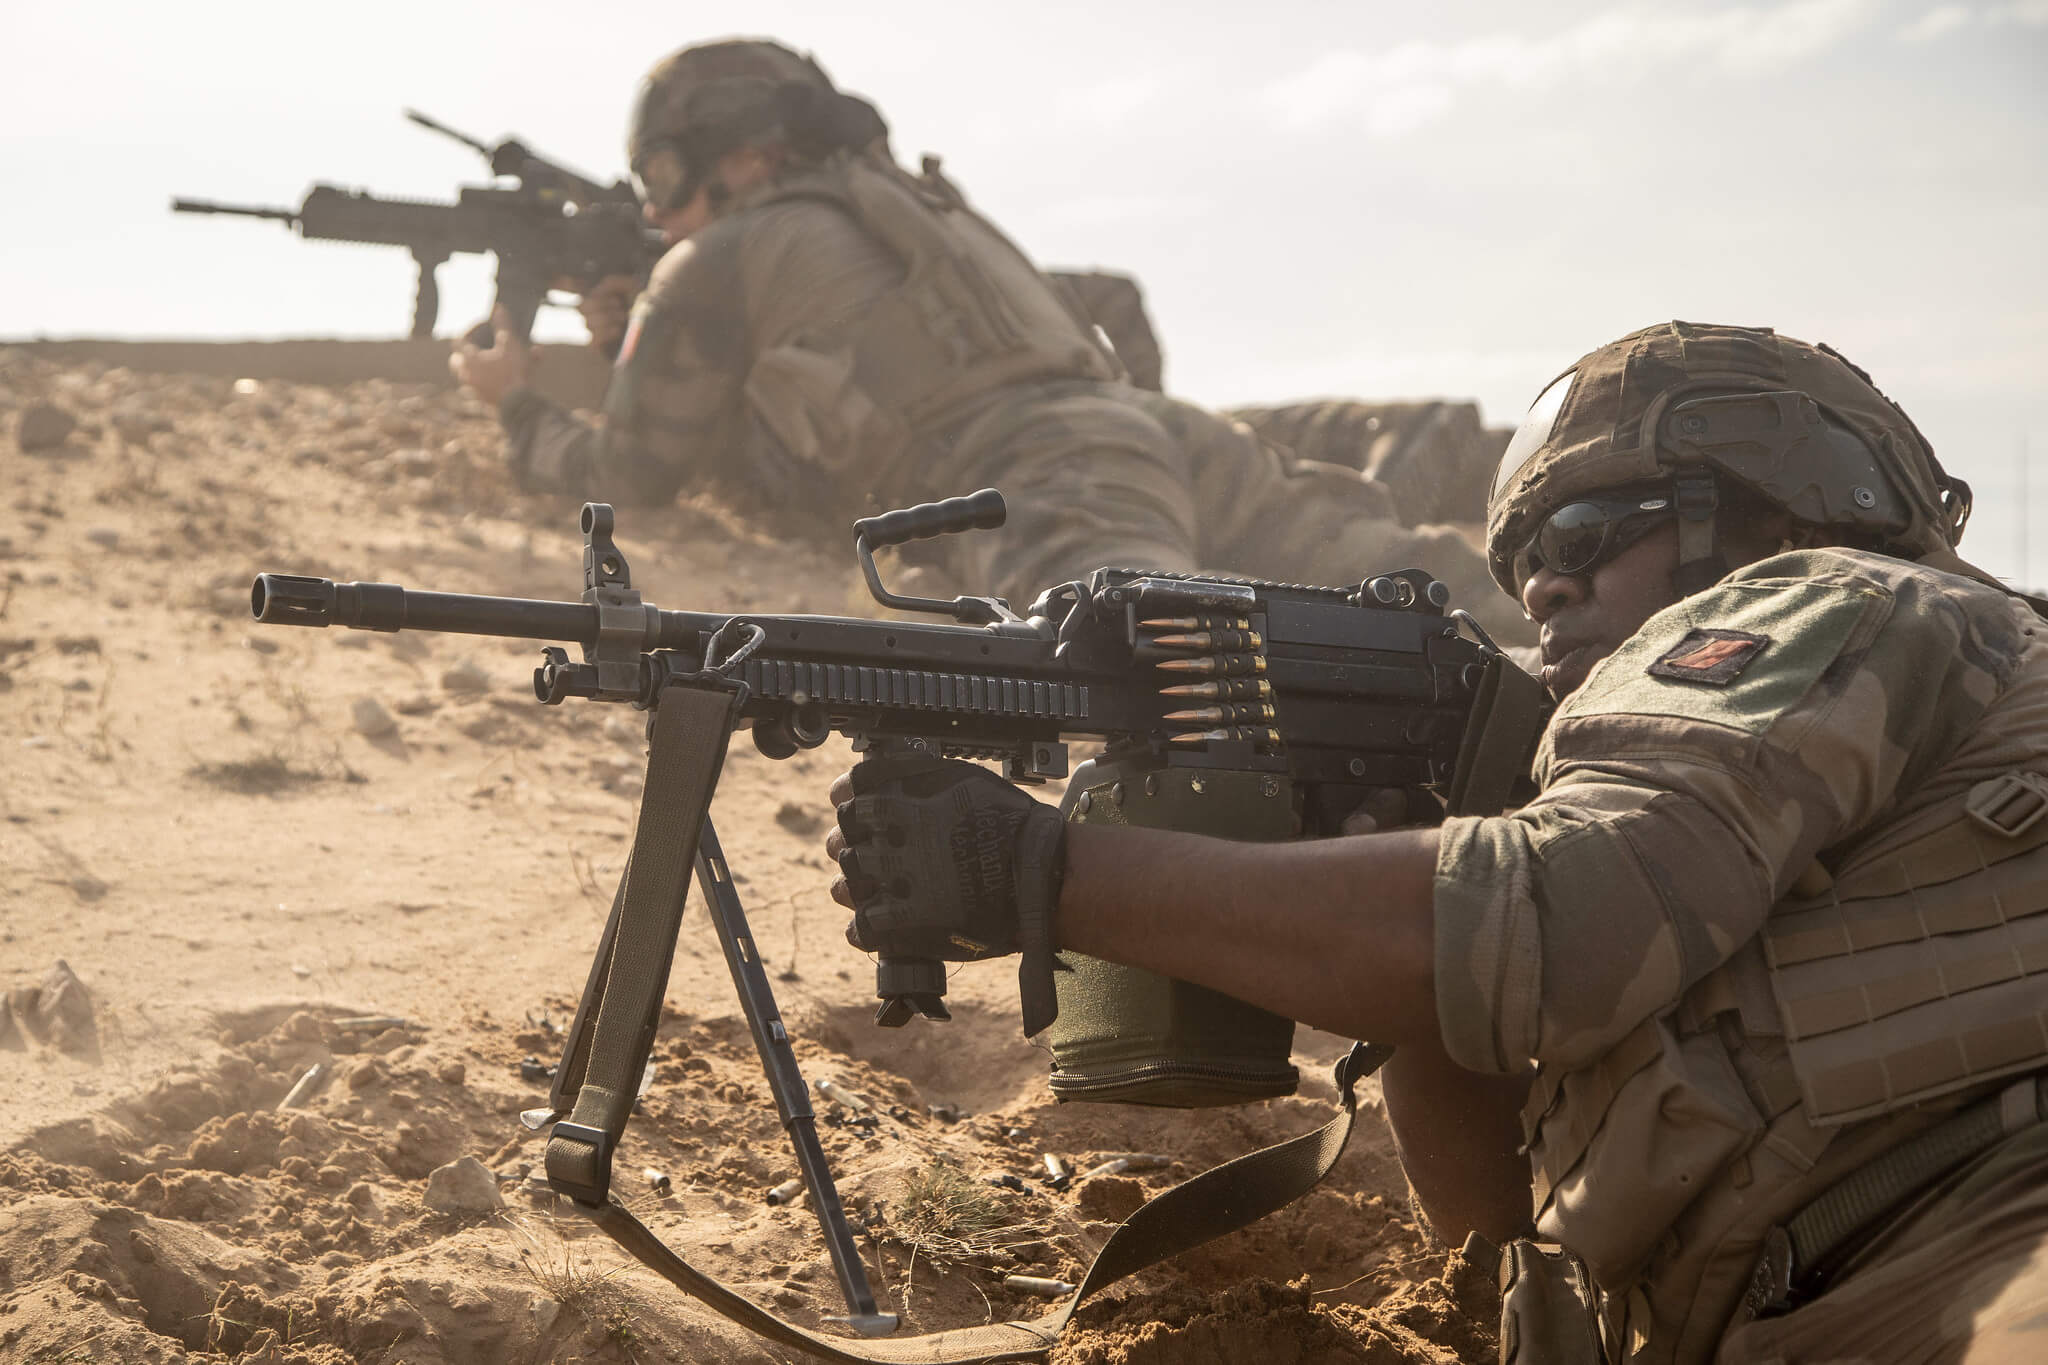 A French marine fires his machine gun during mechanized infantry manoeuvres during Exercise Furious Hawk 2019 in Latvia. NATO